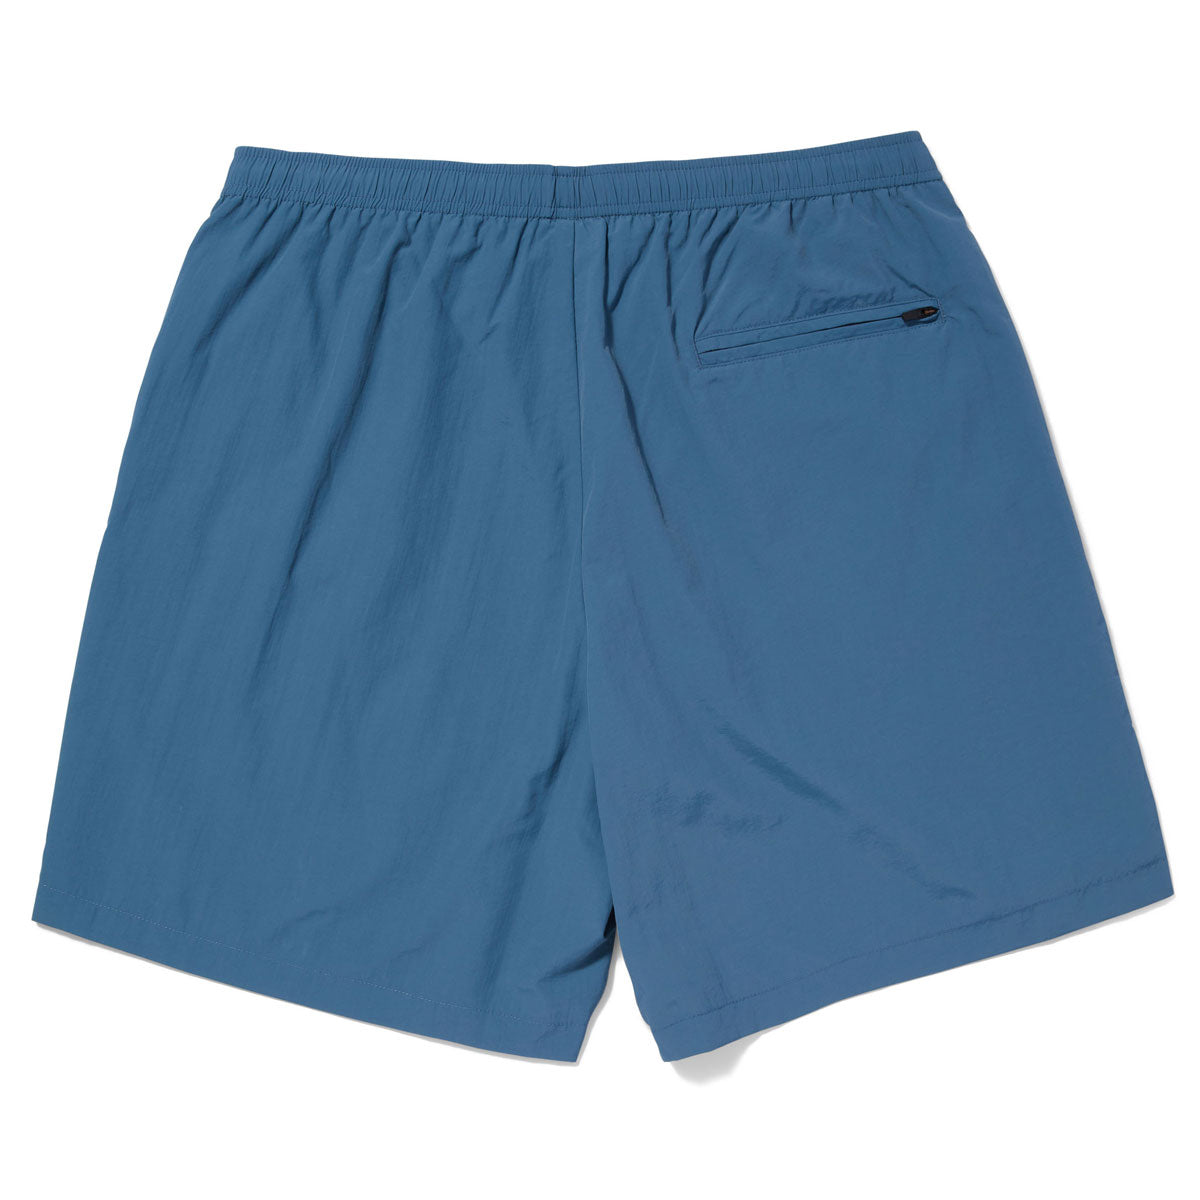 HUF Pacific Easy Shorts - Oil Blue image 2